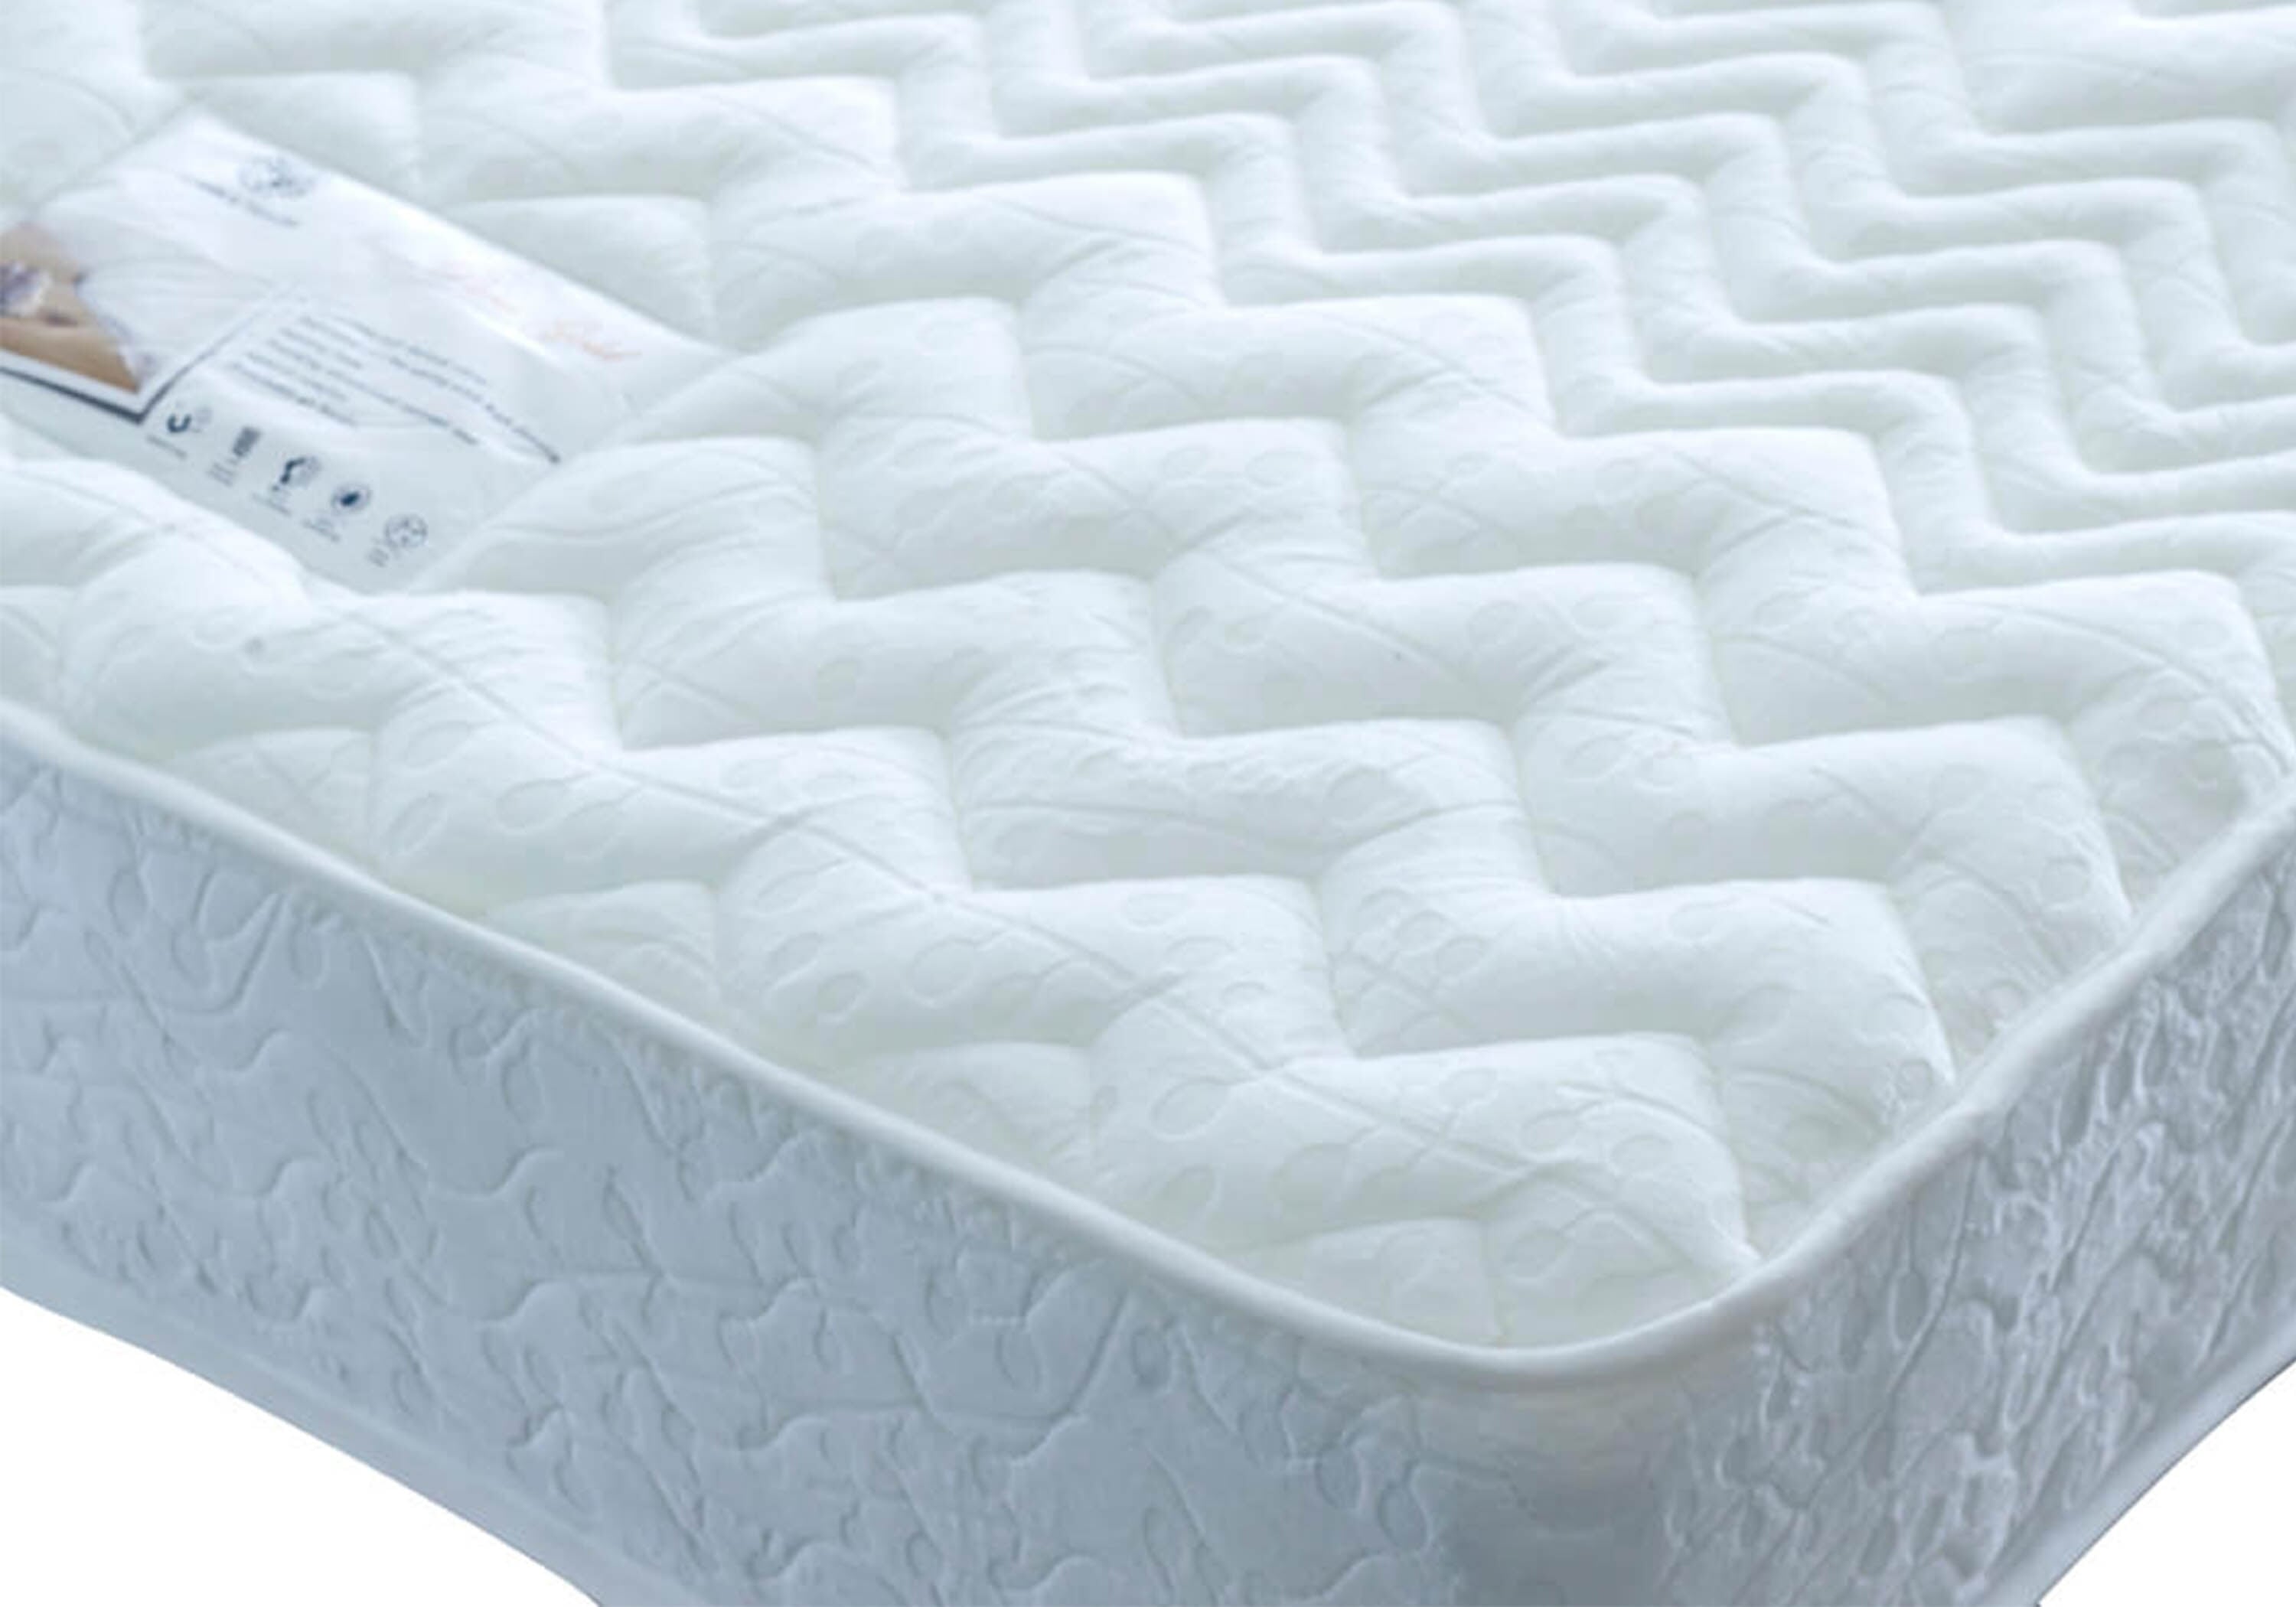 edwin and taylor mattresses reviews